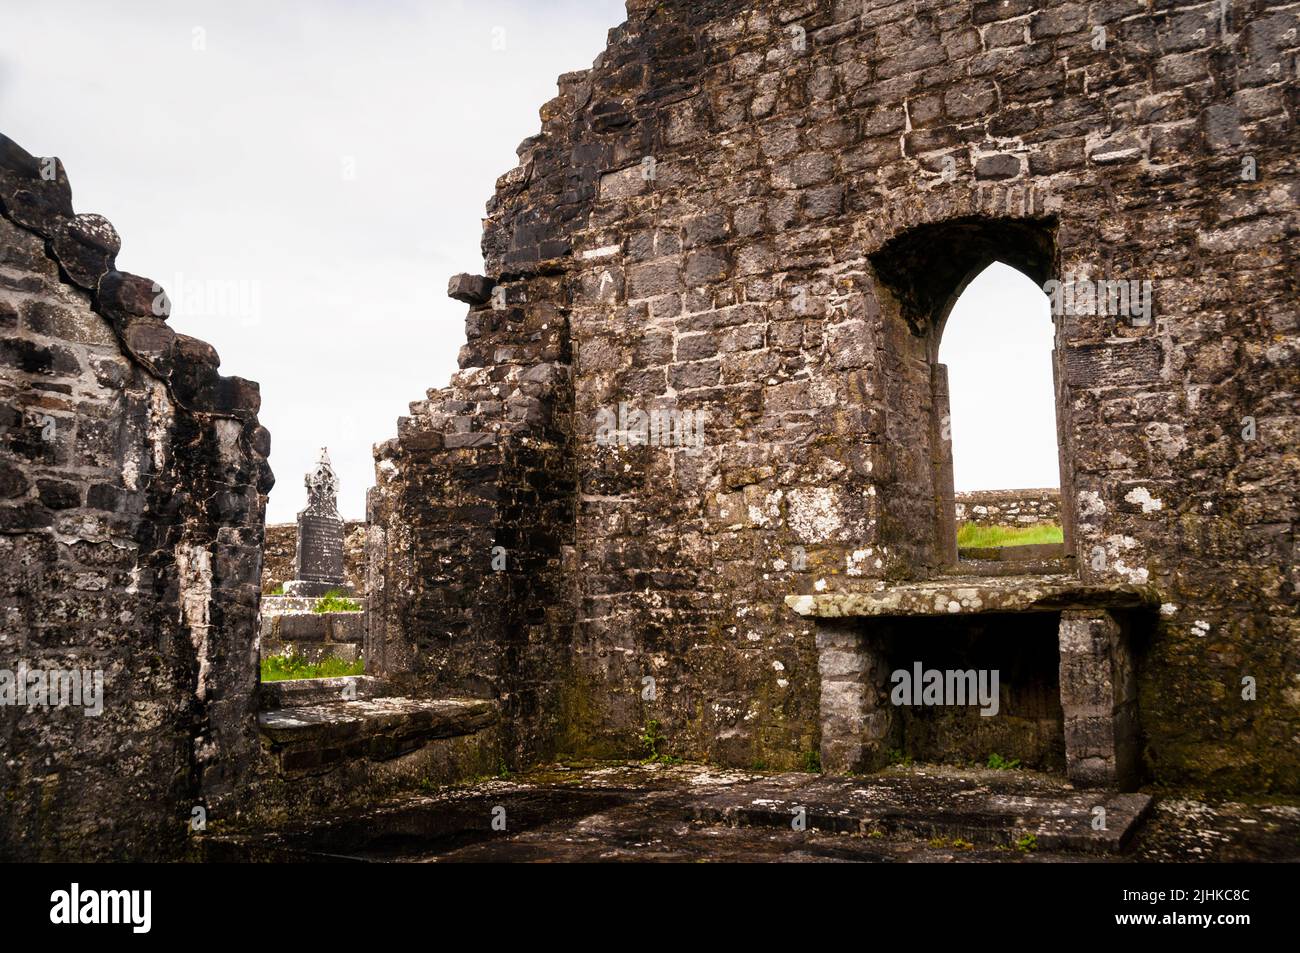 Stepped gable and Gothic pointed arch at Abbey of Ballinassmalla ruins, County Mayo, Ireland. Stock Photo